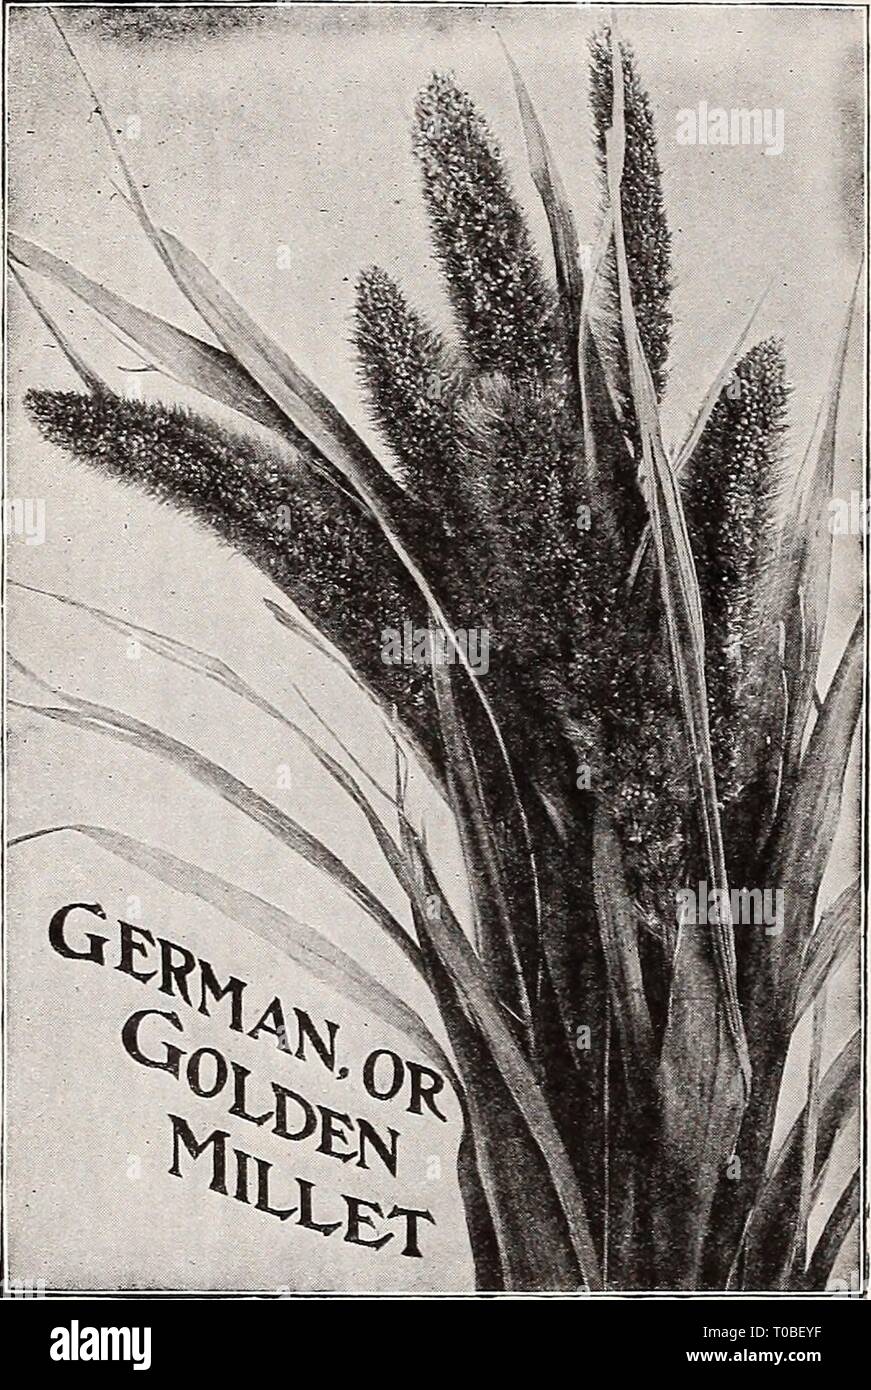 Dreer's garden book 1921 (1921) Dreer's garden book 1921 dreersgardenbook1921henr Year: 1921  50 HENRTADREER -PHIIADELPHIAM-^ RELIABLE FARM SEEDS FIELD, FORAGE AND SILO SEEDS Prices of all Farm Seeds are f. o. b. Philadelphia and subject to market changes MILLET German, or Golden Millet {Panicum Oermanicum). (See cut.) A valuable annual hay and fodder crop. Sow 1 bushel to the acre. Bushel (50 lbs.), write for price. Hungarian Millet {Panicum Hungariensis). An annual forage plant, early and productive, growing 2 to 3 feet high. Sow 1 bushel to the acre. Bushel (48 lbs.), write for price. Egypt Stock Photo